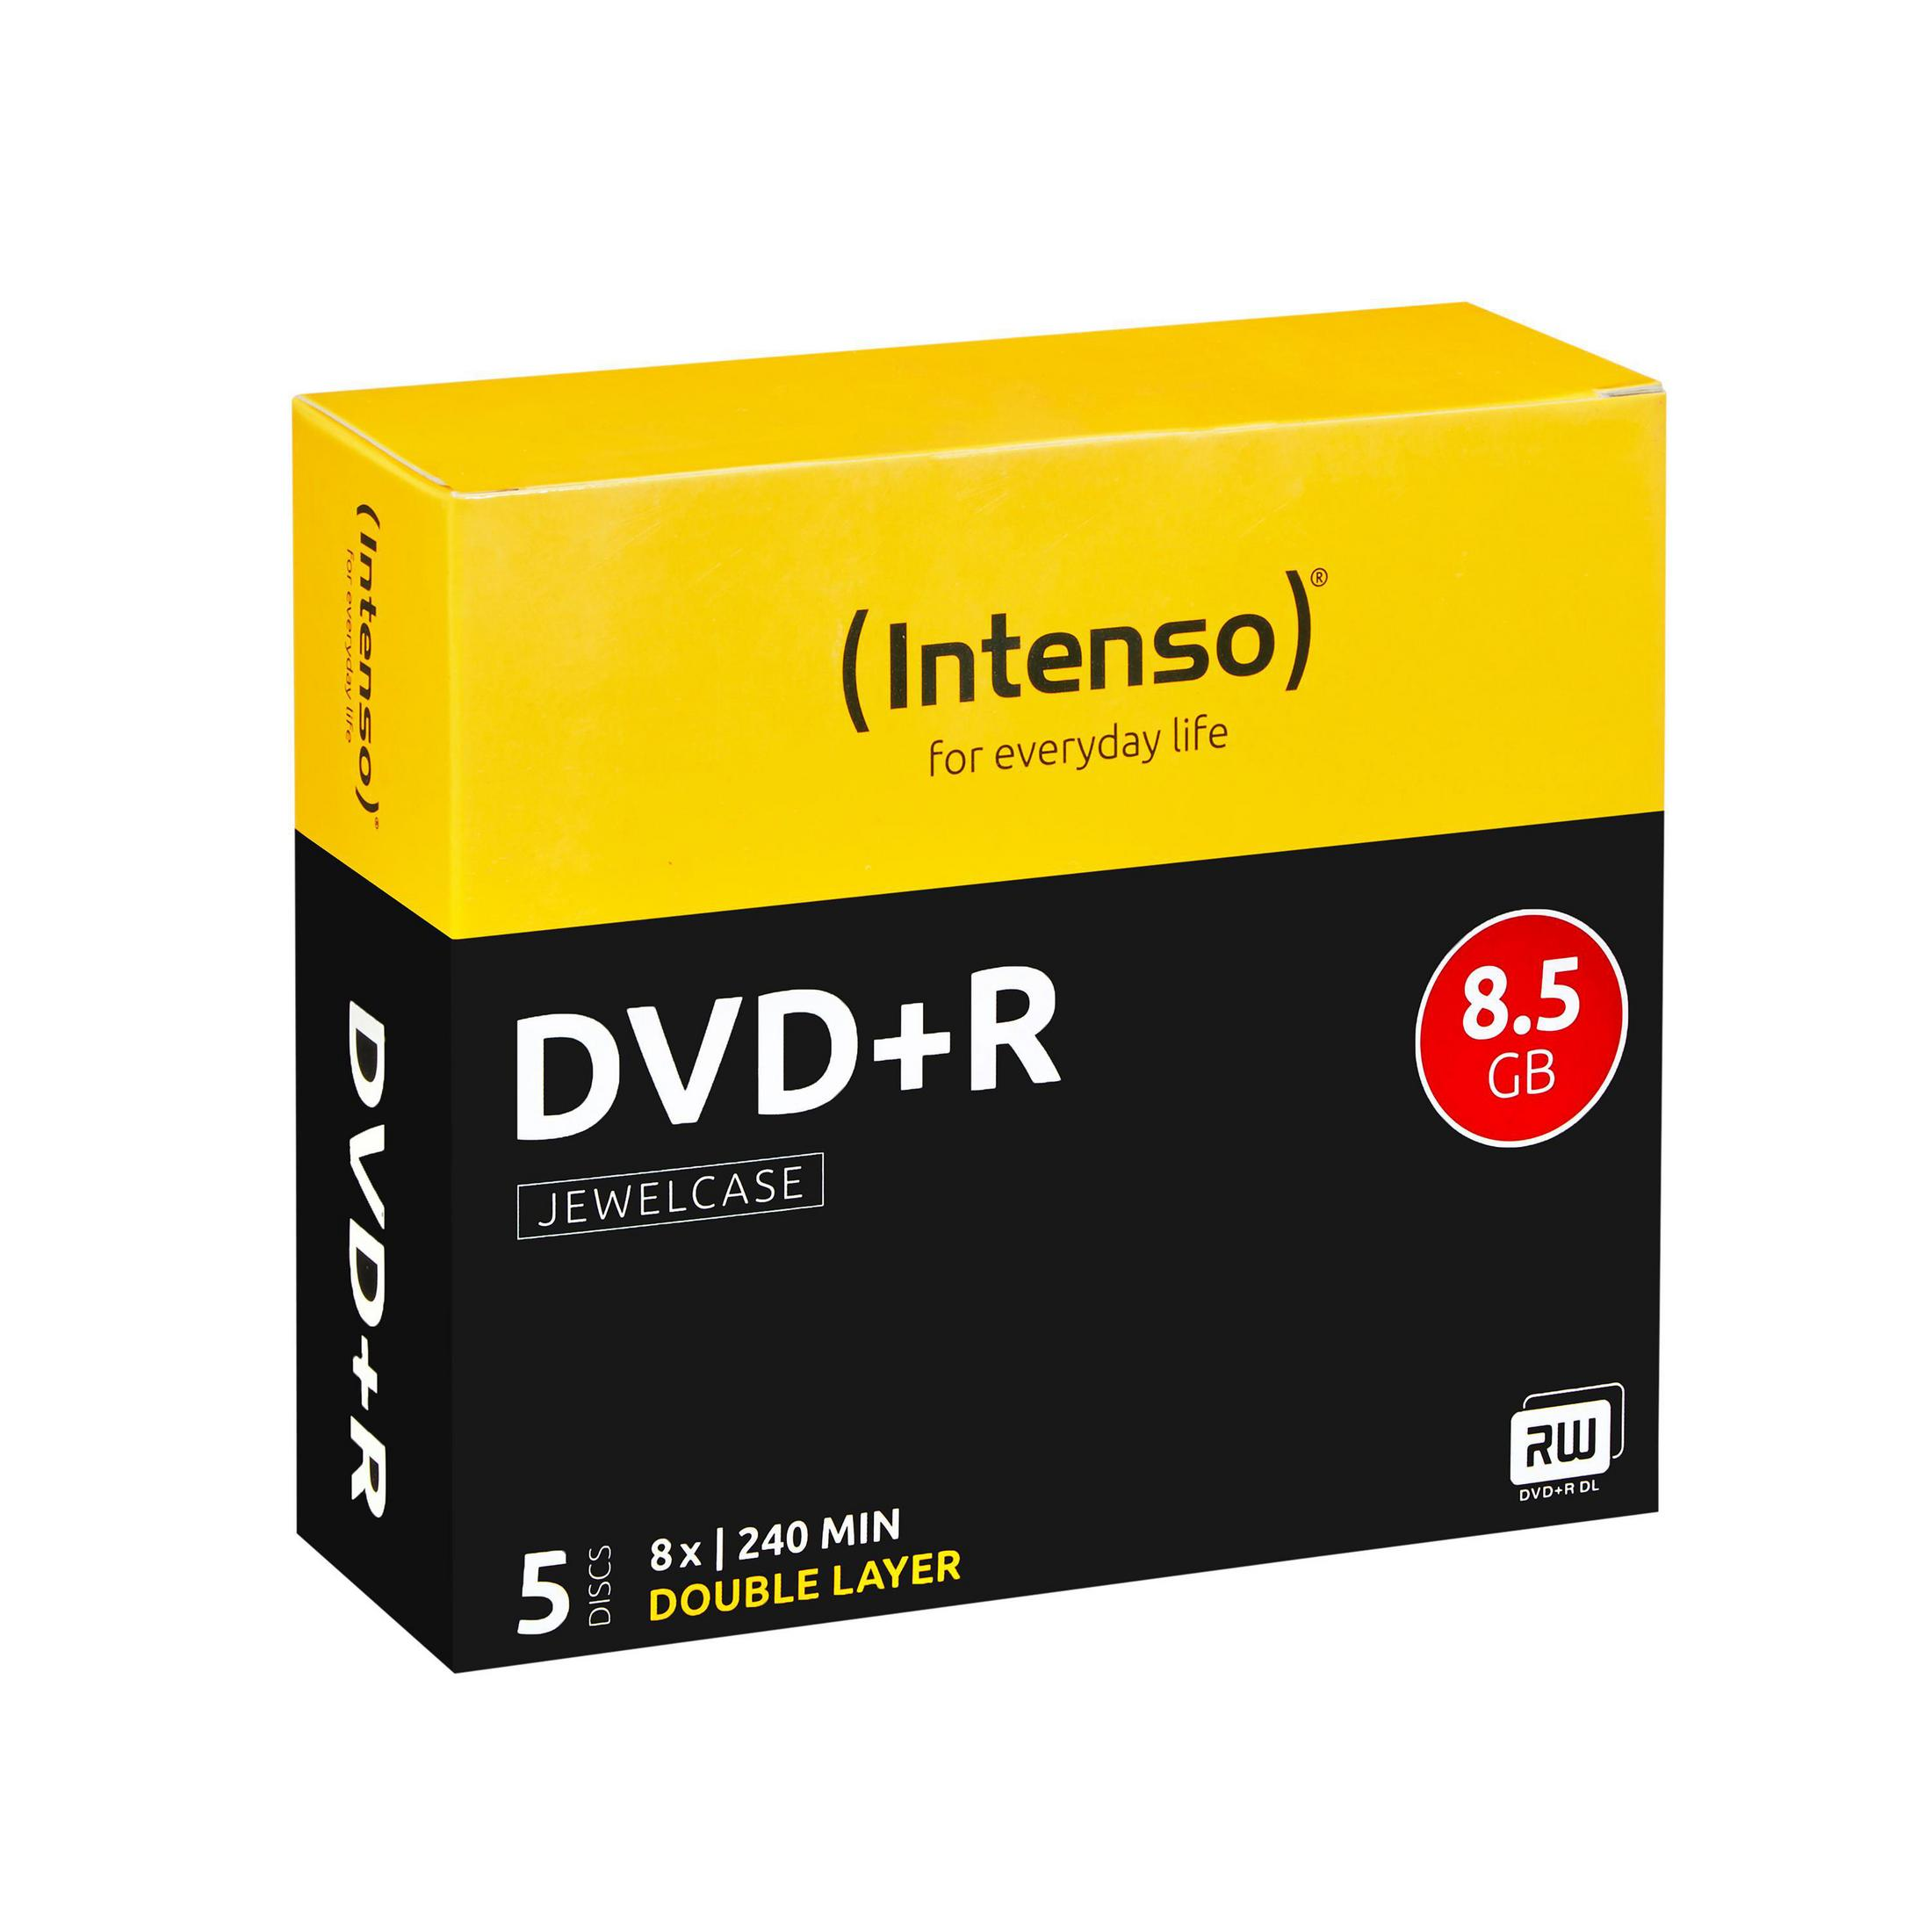 INTENSO DVD+R DL 8X Double JC 5ER DVD+R Rohlinge Layer 4311245